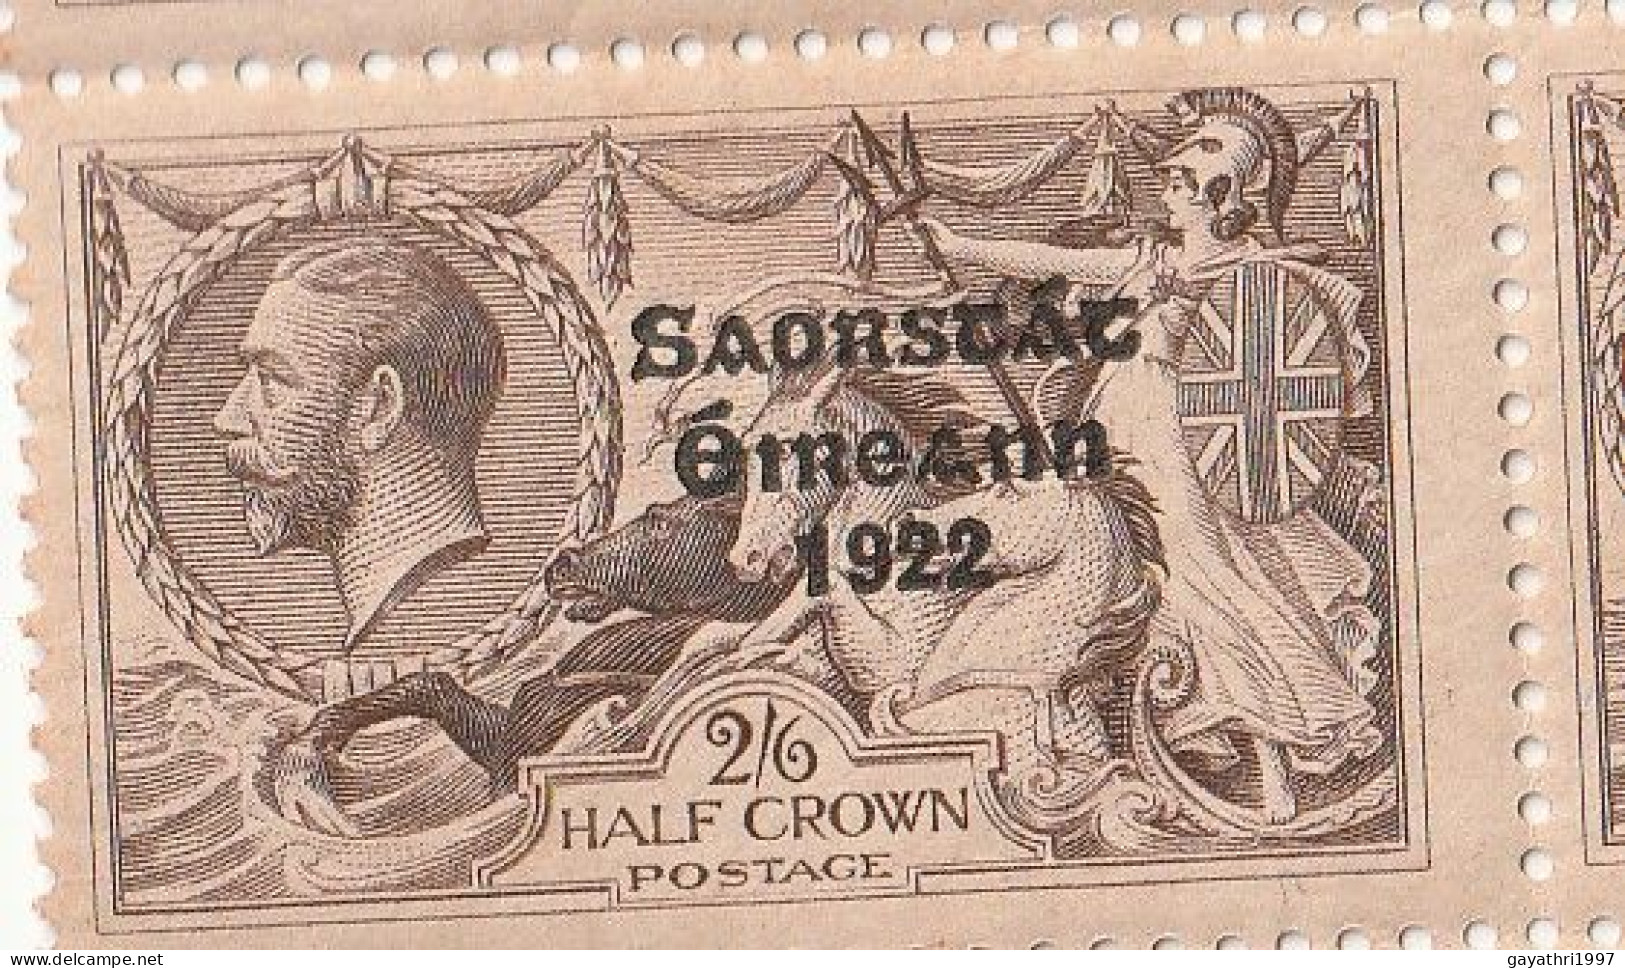 Ireland 1922-23 Irish free state SG64? with Variety DOT after S IN many STAMPS,TOTAL19 STAMPS .block OF 12 AND Block of6